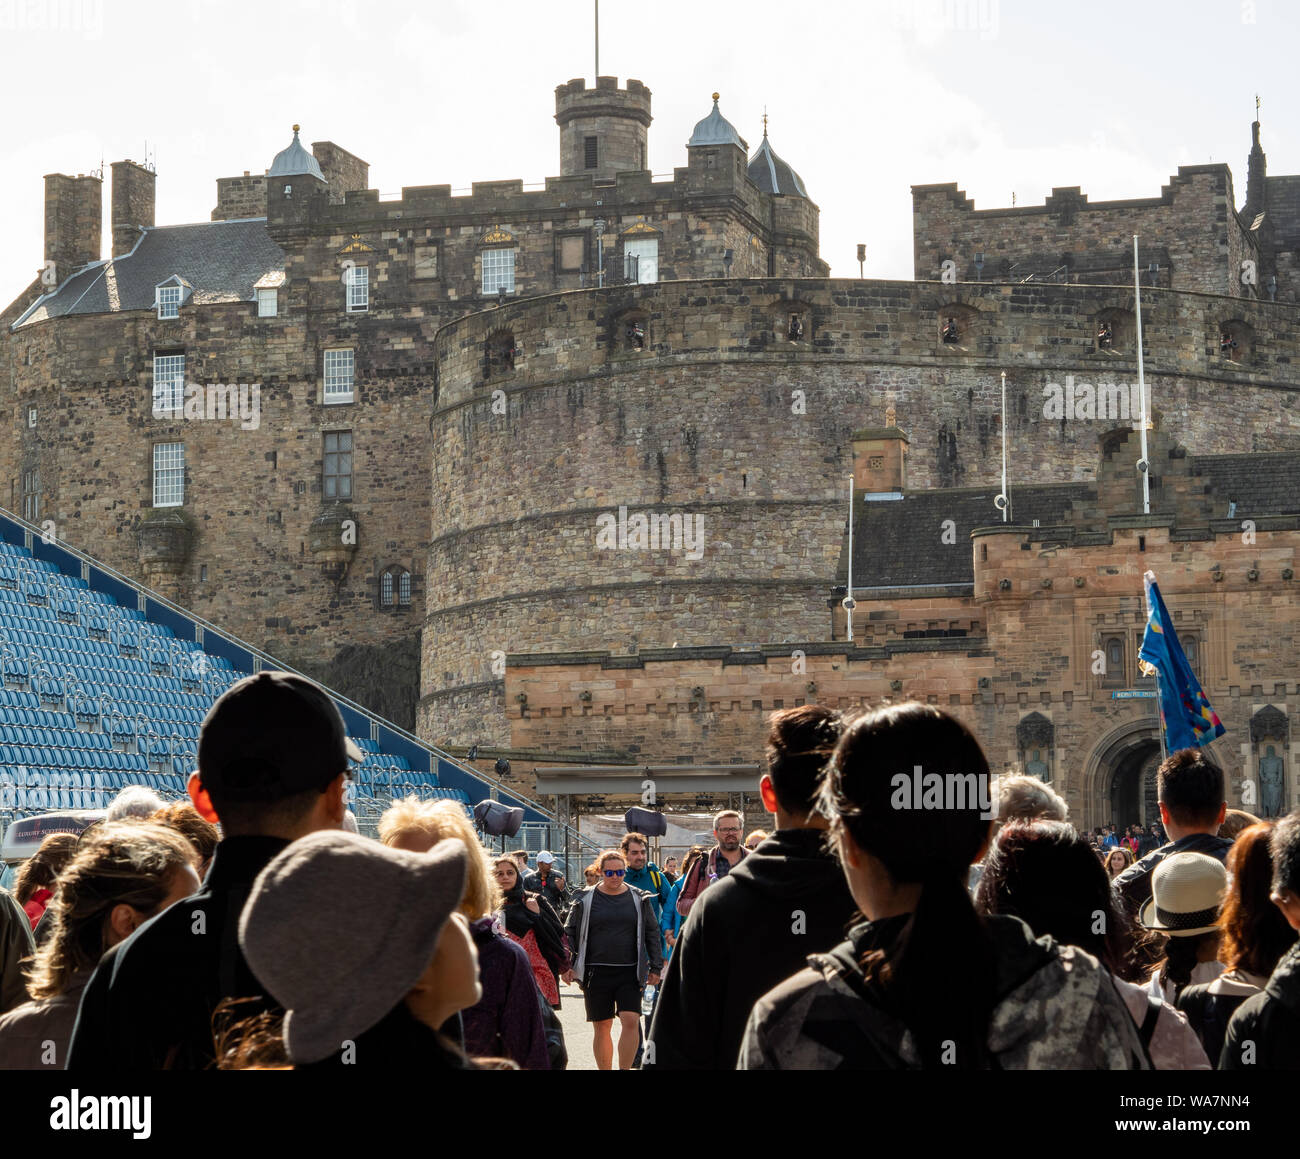 Crowds of tourists and visitors on the esplanade in front of Edinburgh Castle, Scotland, UK. Stock Photo